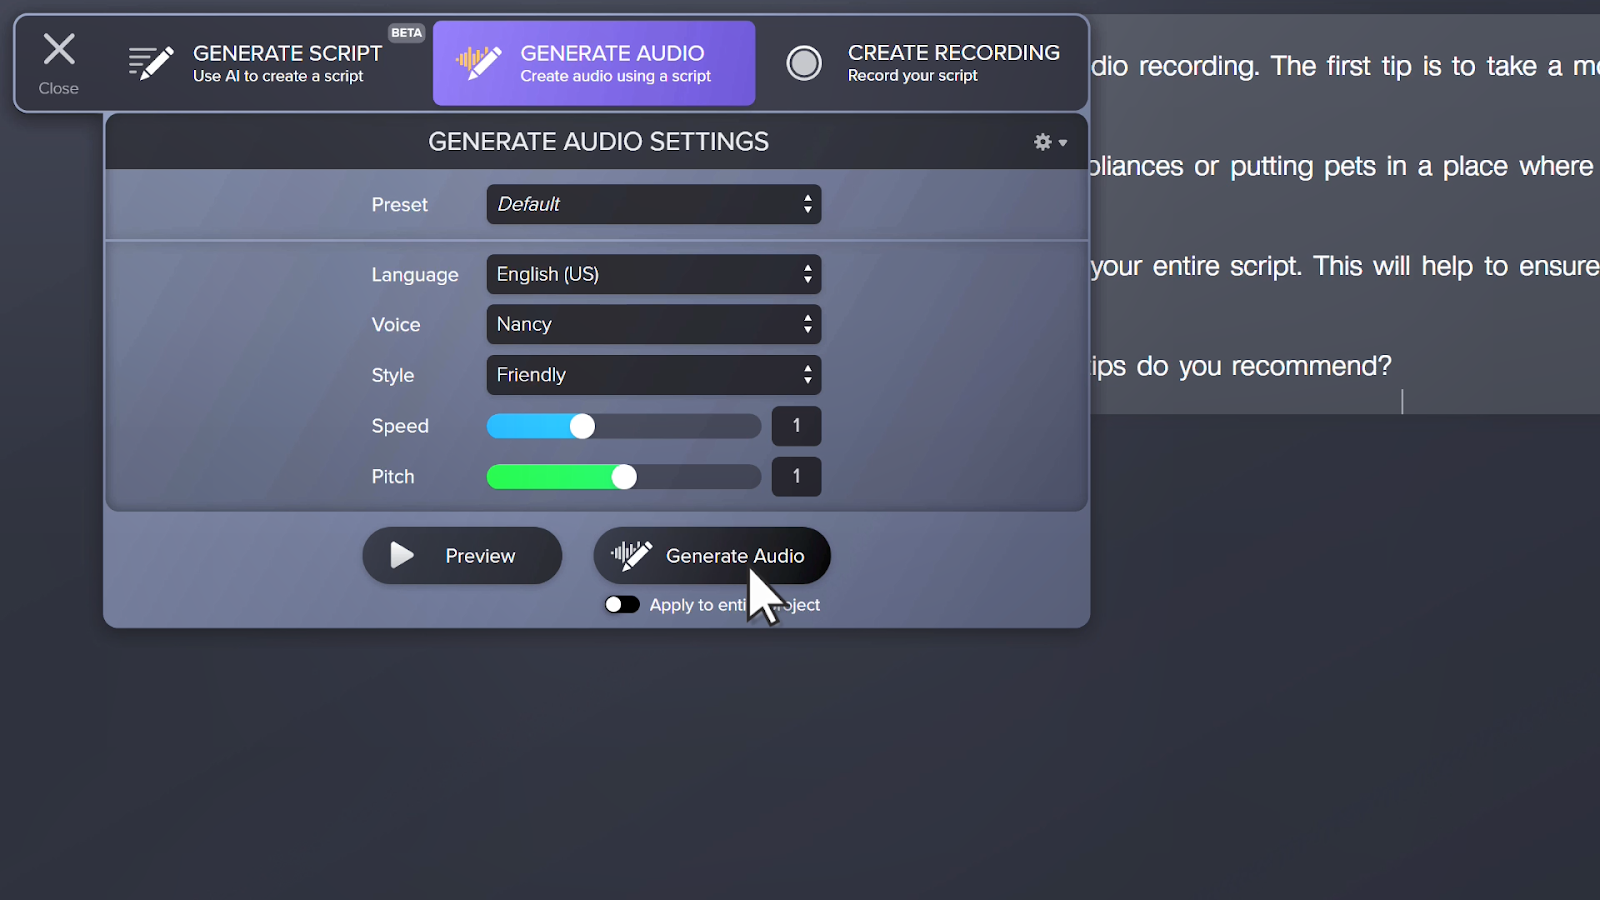 Image of Audiate's Generate Audio menu open, showing the different options that create audio.